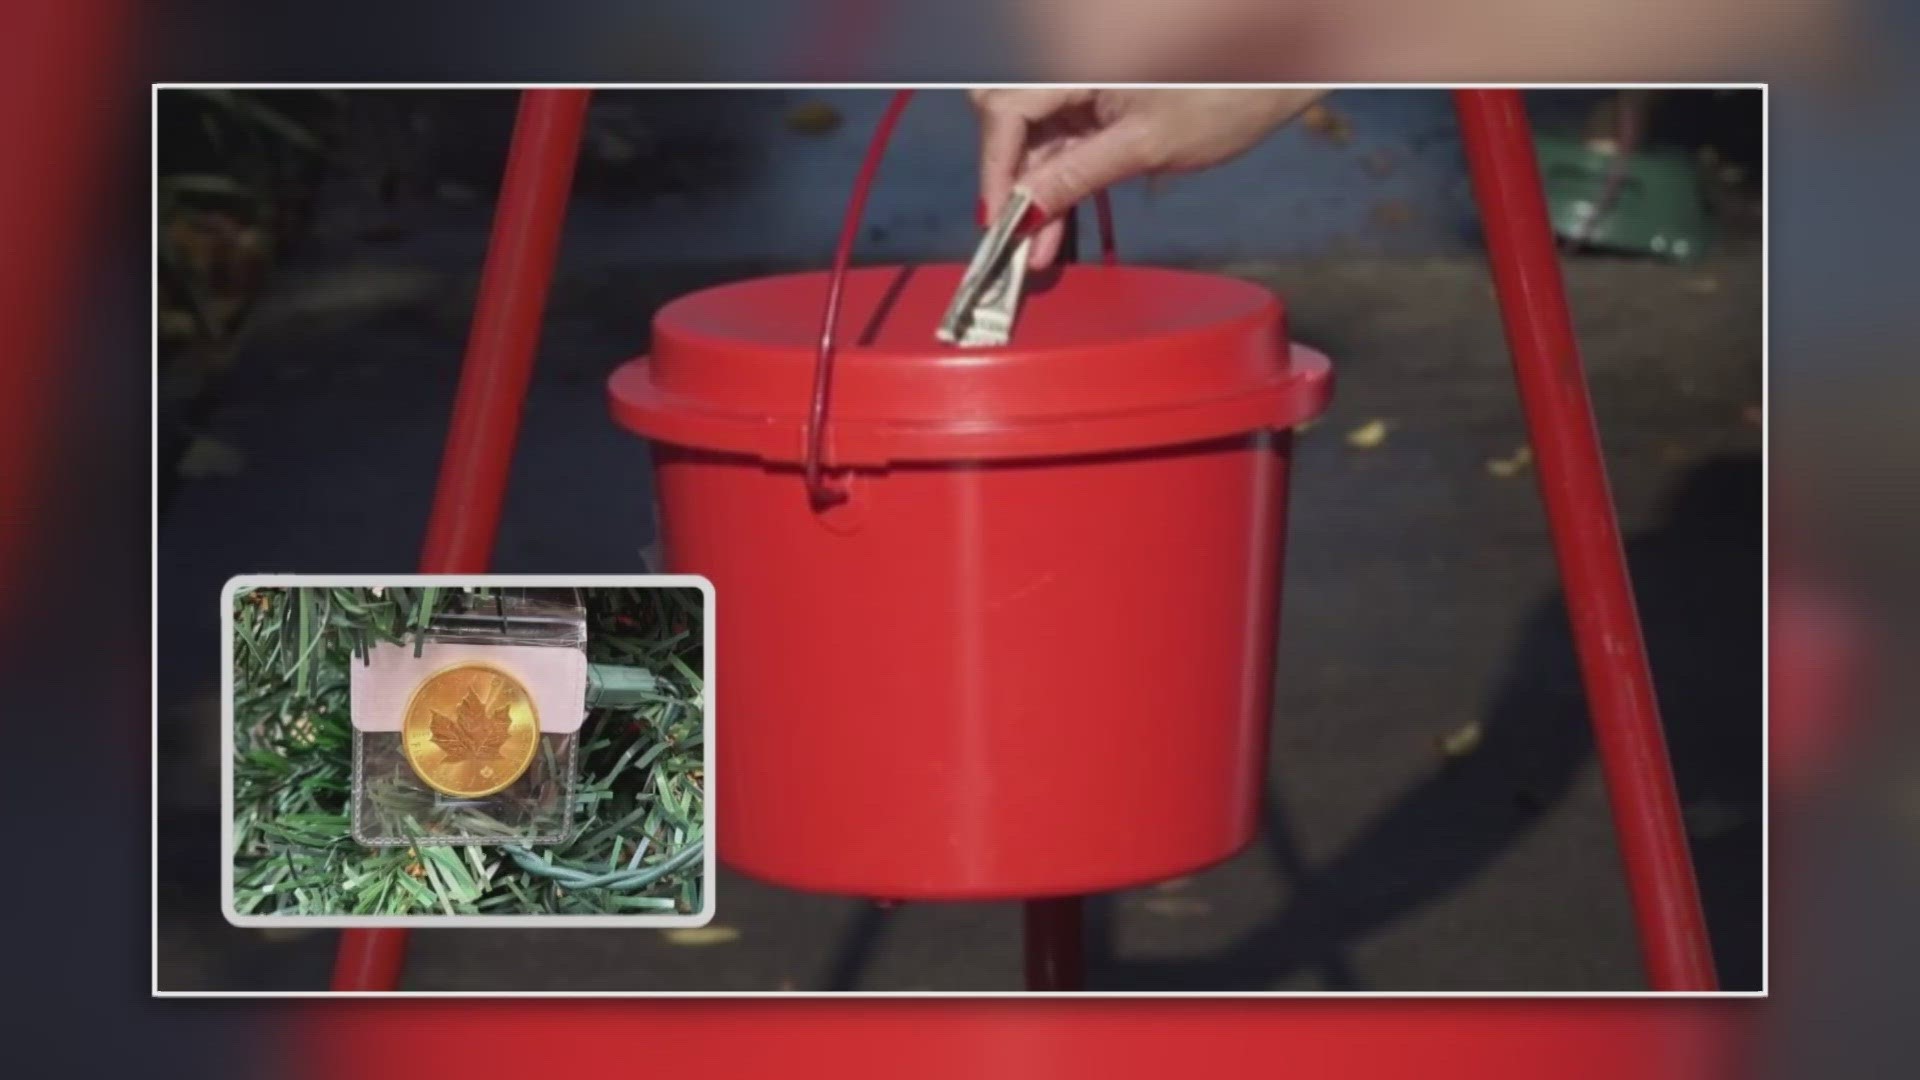 The Salvation Army got a "Christmas Miracle" when a one-ounce gold coin was found in a red kettle in front of the Bashford Manor Walmart.